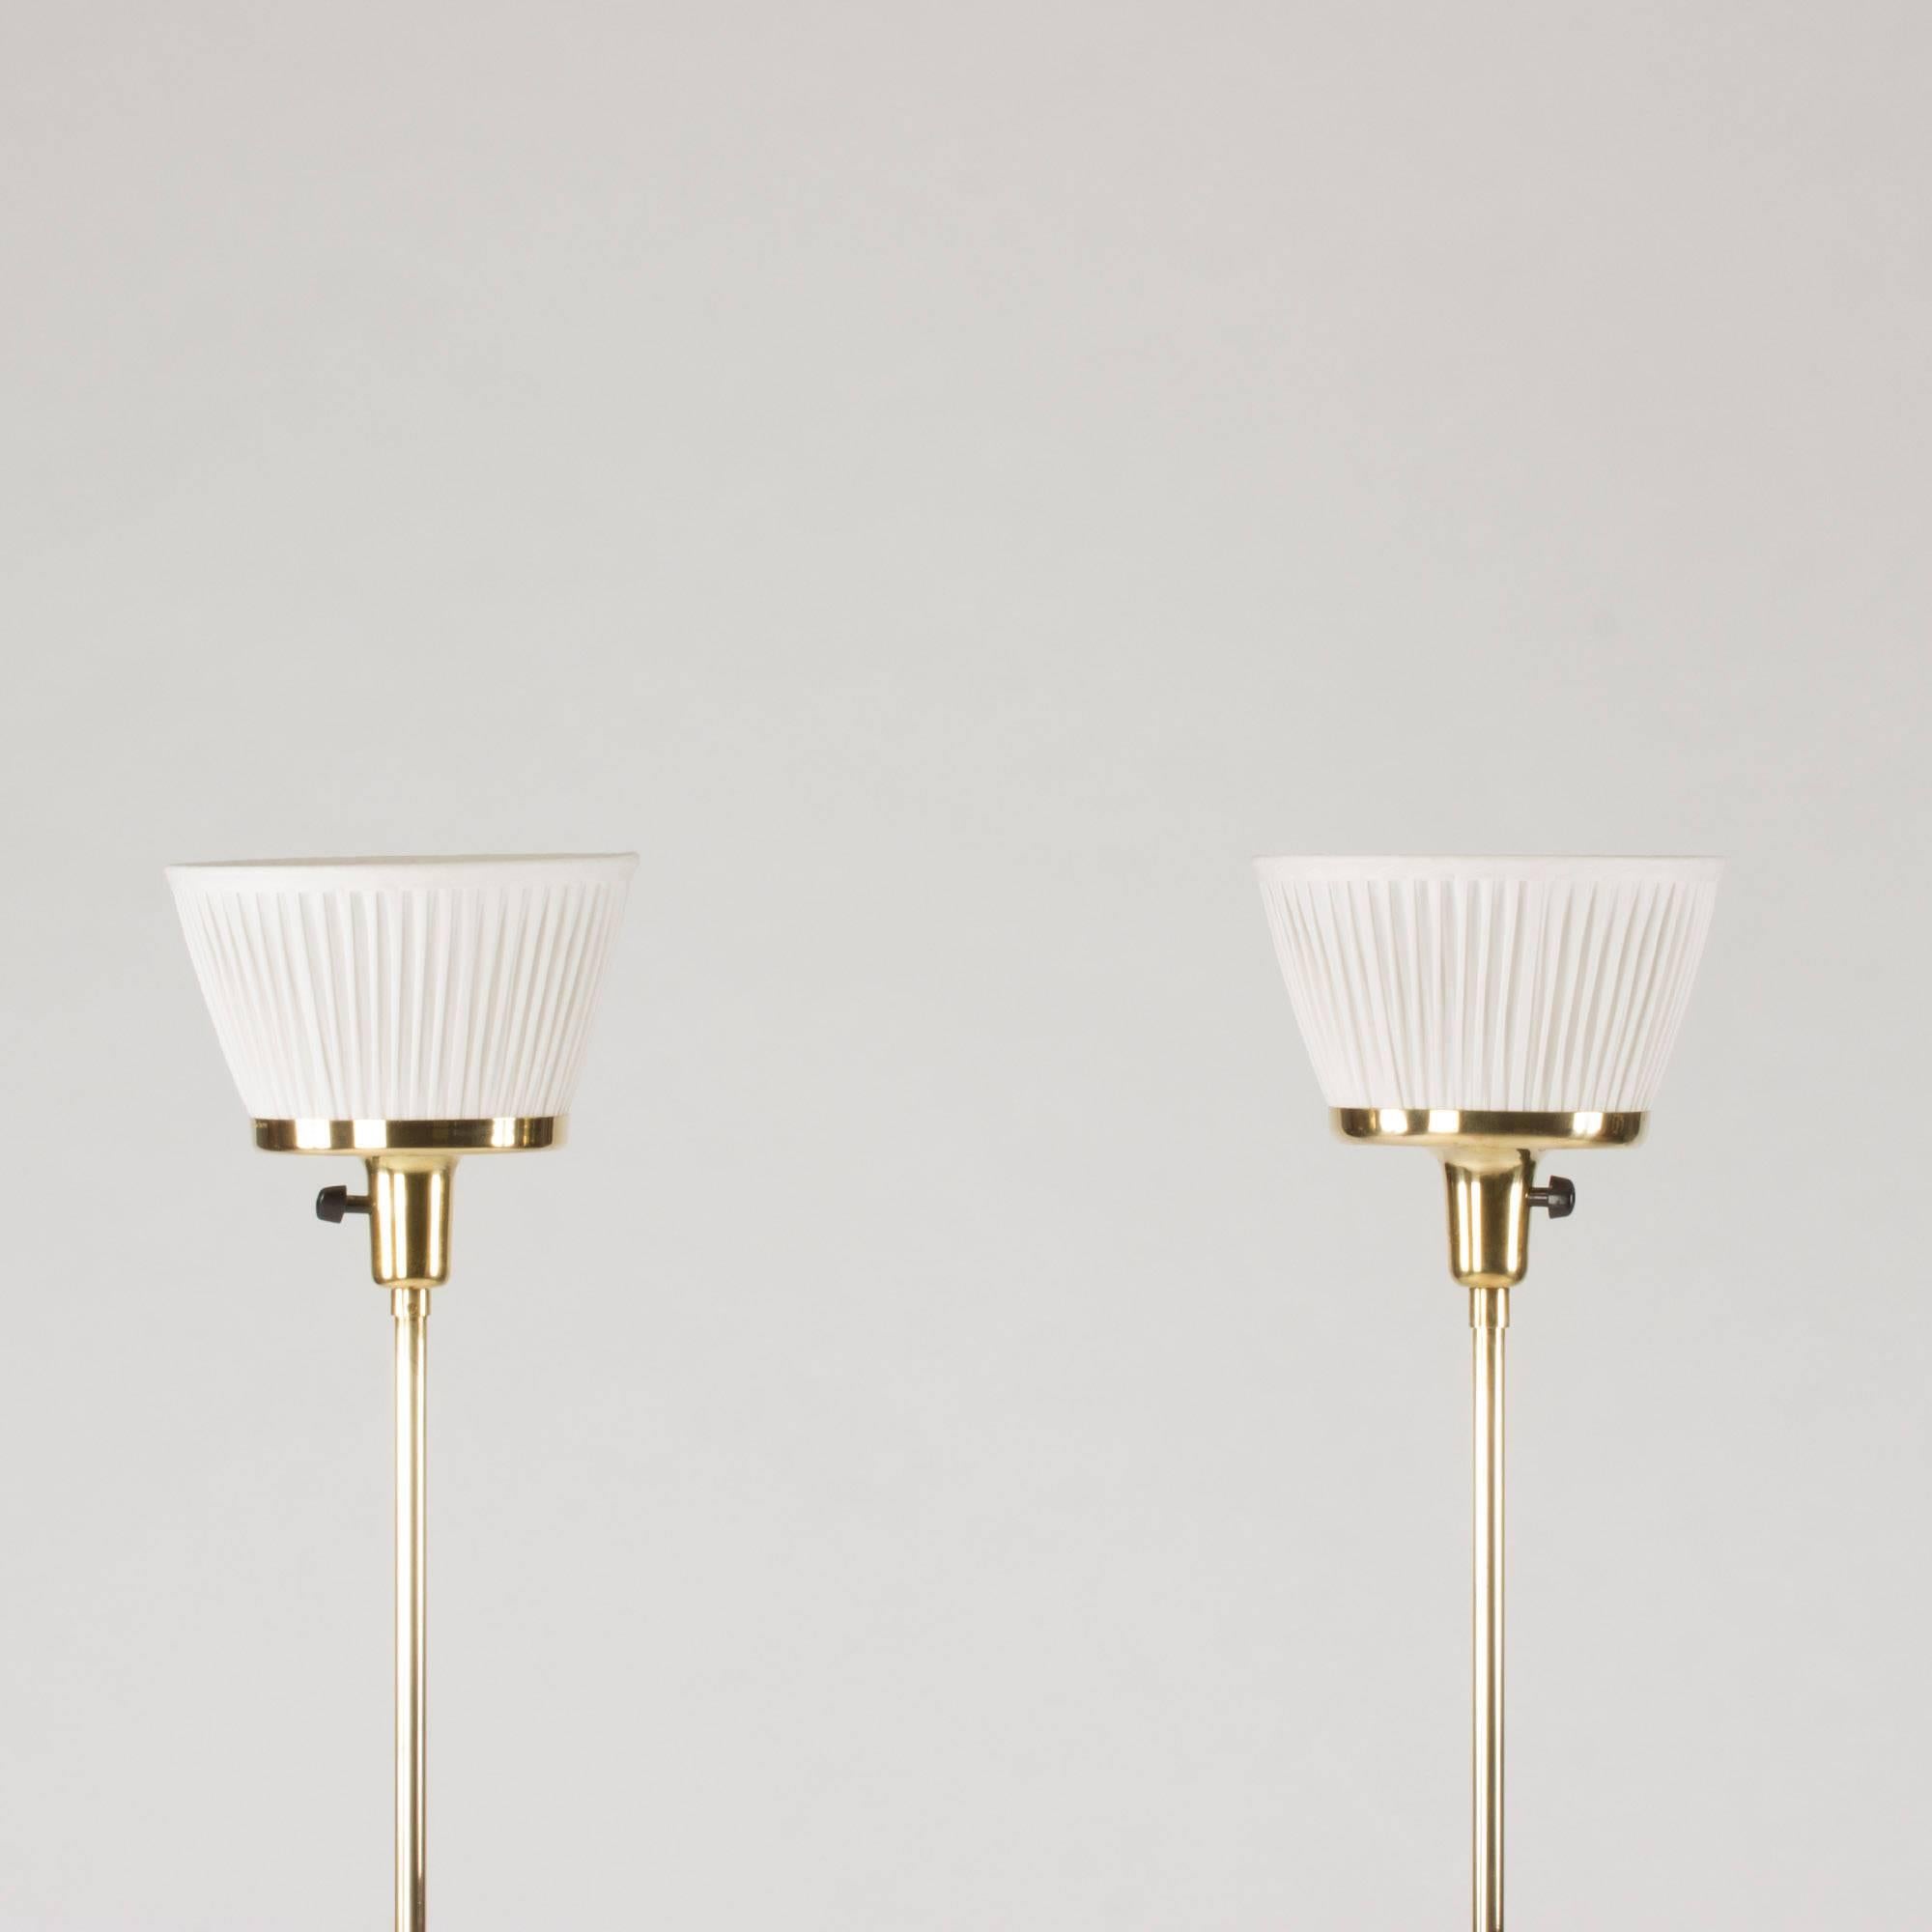 Pair of brass uplight floor lamps by Josef Frank. Beautiful, slender design with triple feet and cheeky, short linen shades.